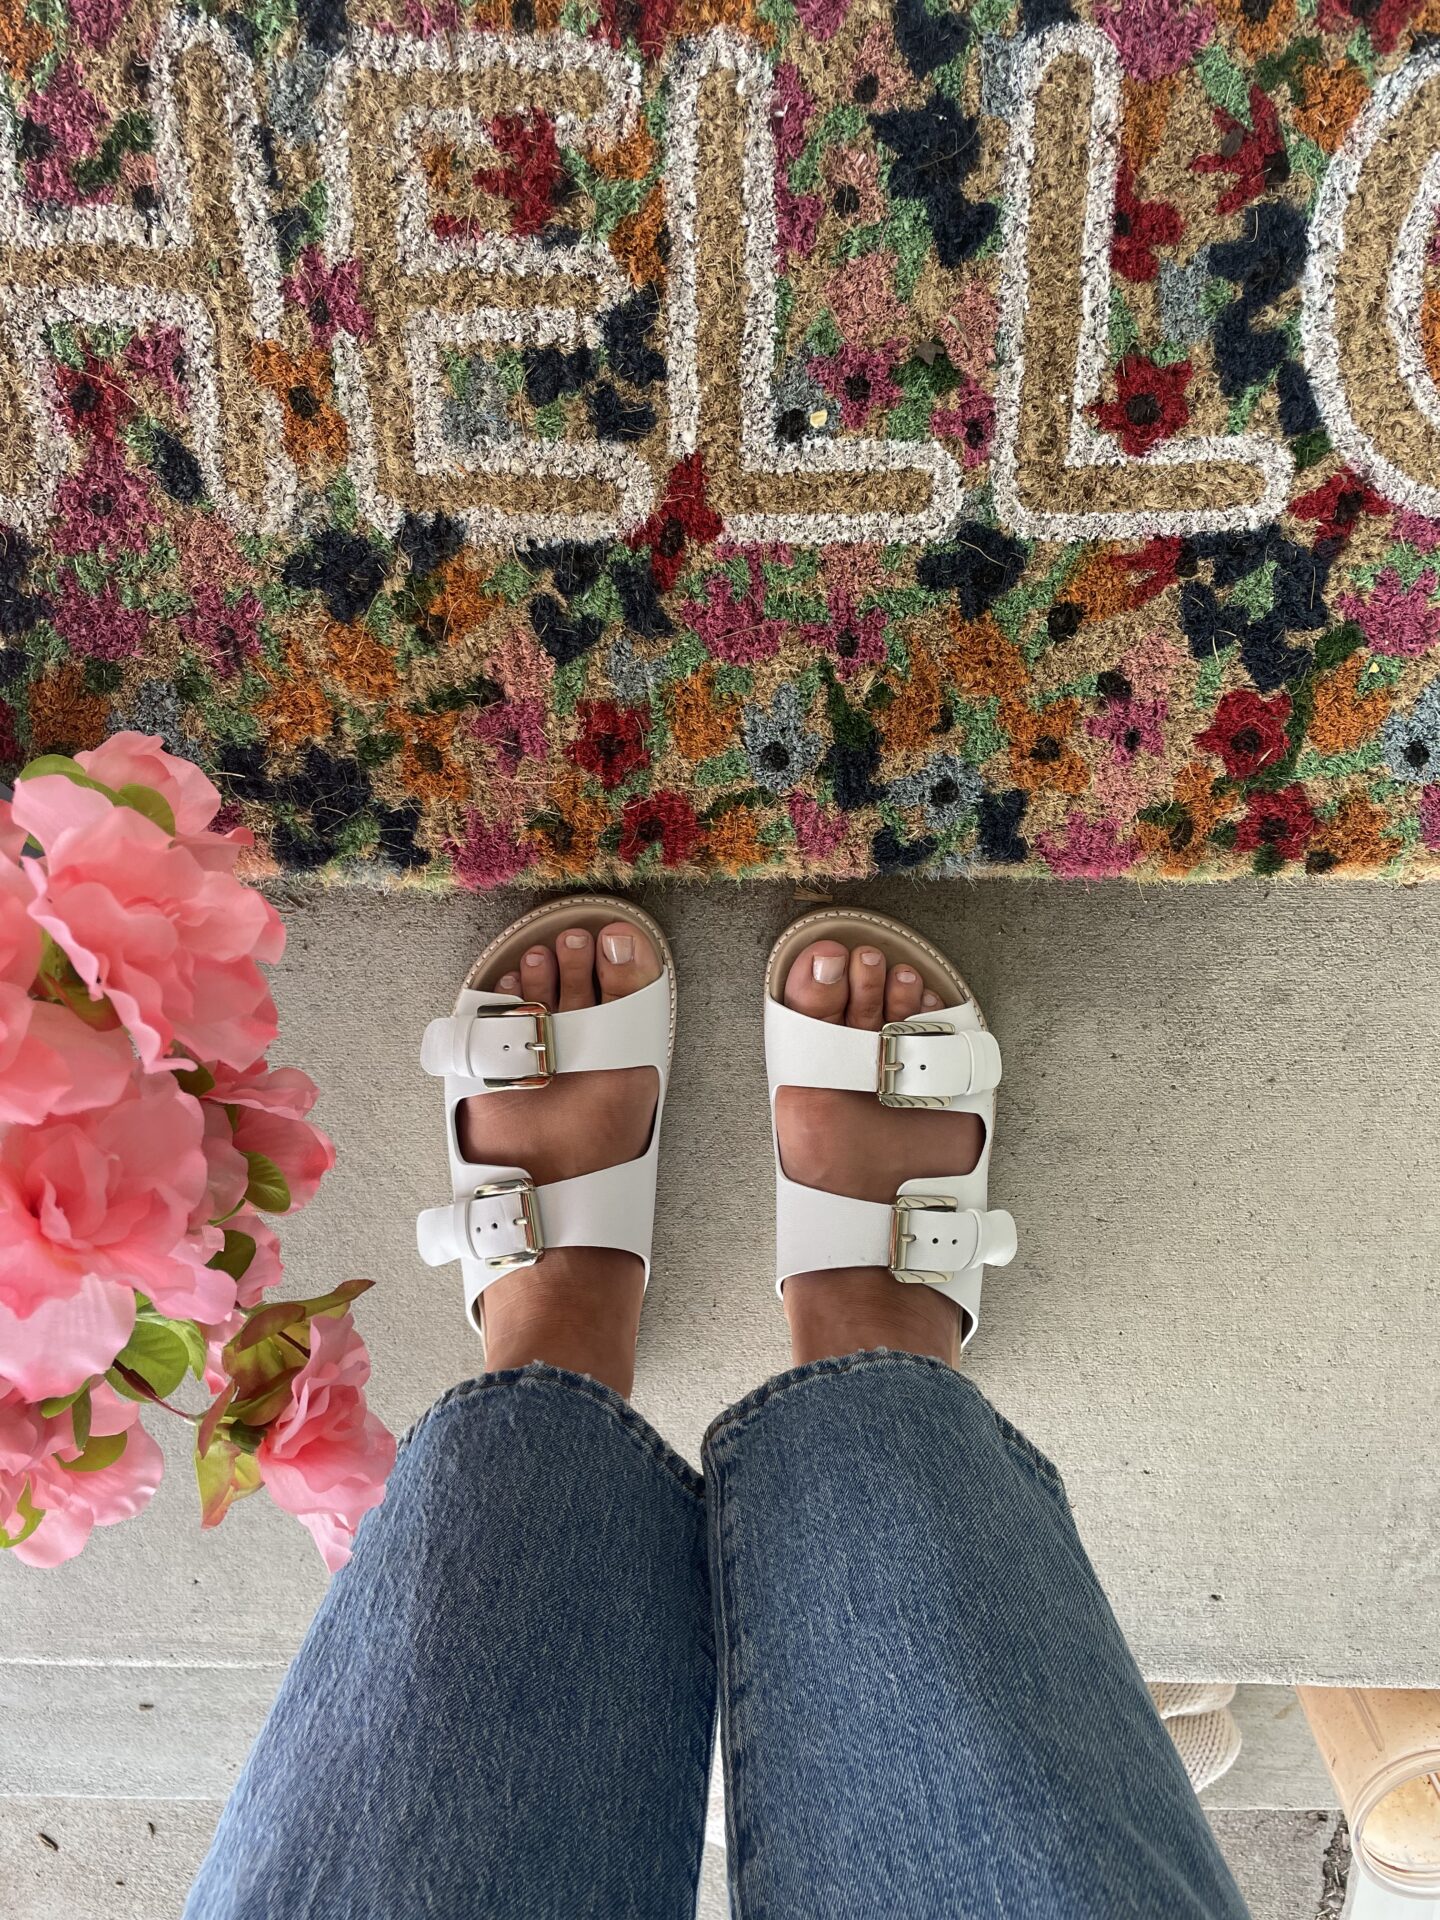 Karin Emily wears a pair of white double strap sandals, blue wide leg jeans, and white double strap sandals as part of an ABLE Spring Try On